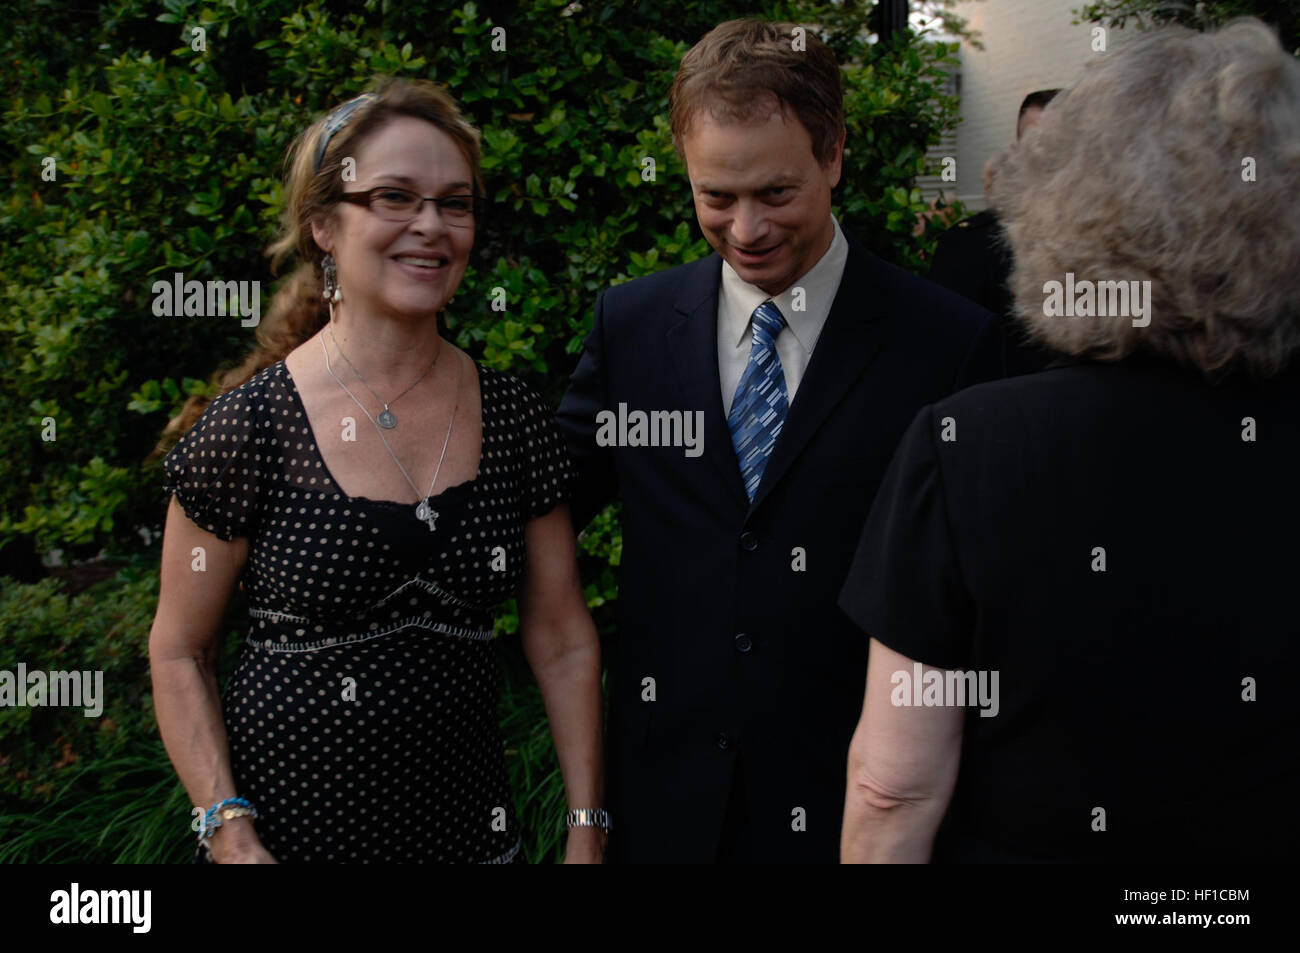 Actor Gary Sinise, center, and his wife, Moira Harris, left, attend an Evening Parade reception at the Home of the Commandants in Washington, D.C., May 25, 2007. Evening parades are held every Friday at Marine Barracks Washington during the summer months. (U.S. Marine Corps photo by Cpl. John P. McGarity/Released) Gary Sinise and Moira Harris 2007 Stock Photo